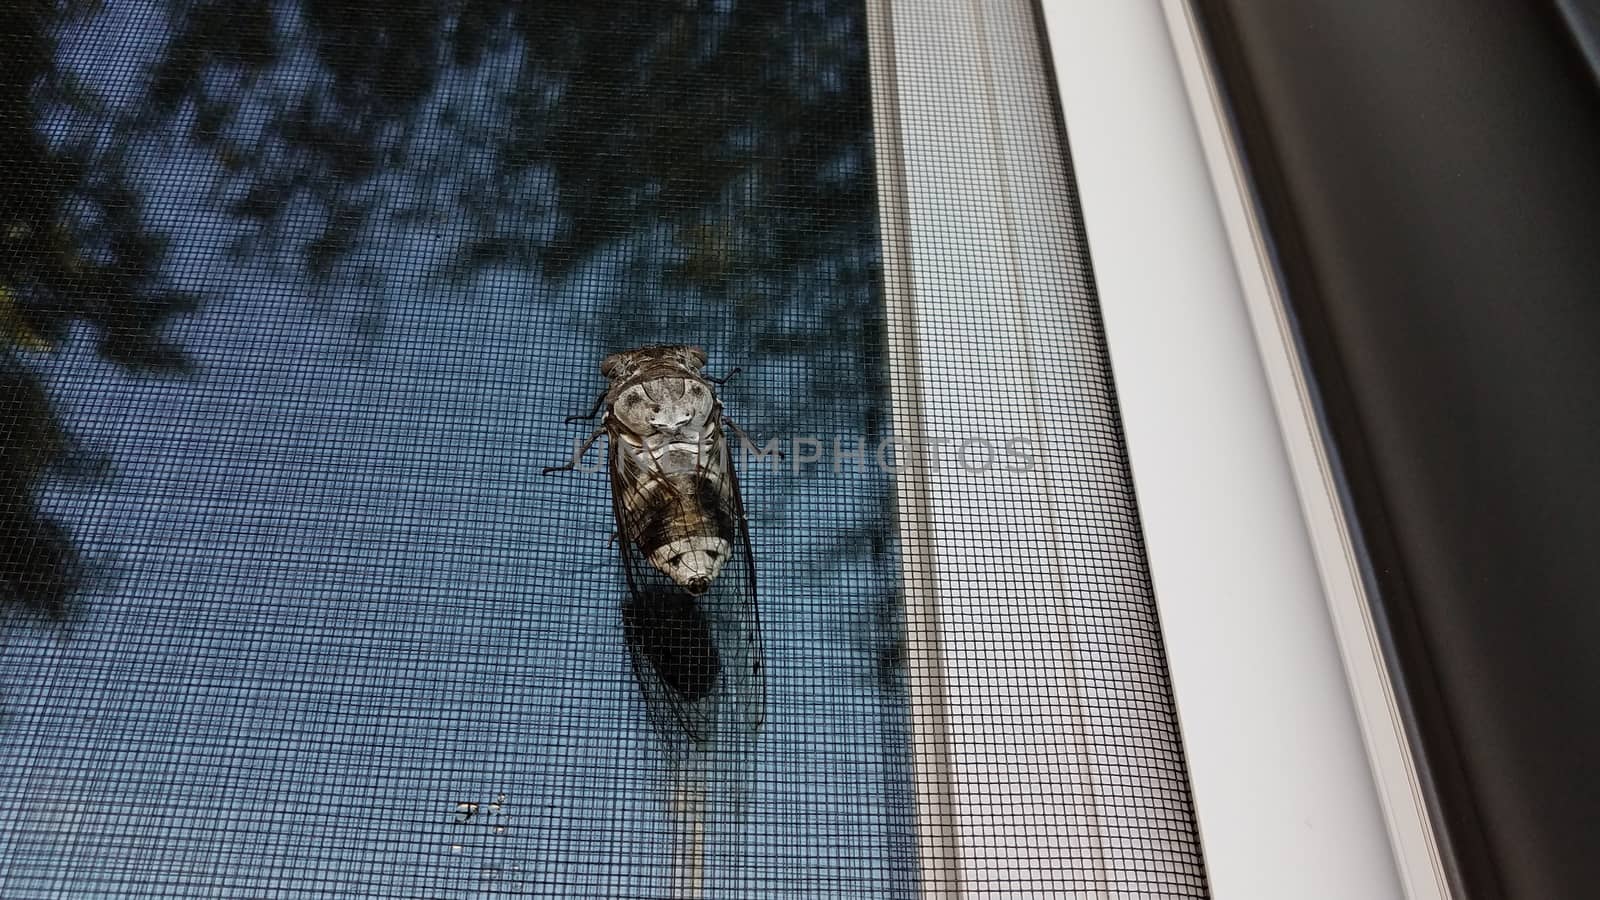 cicada insect or bug with wings on window screen